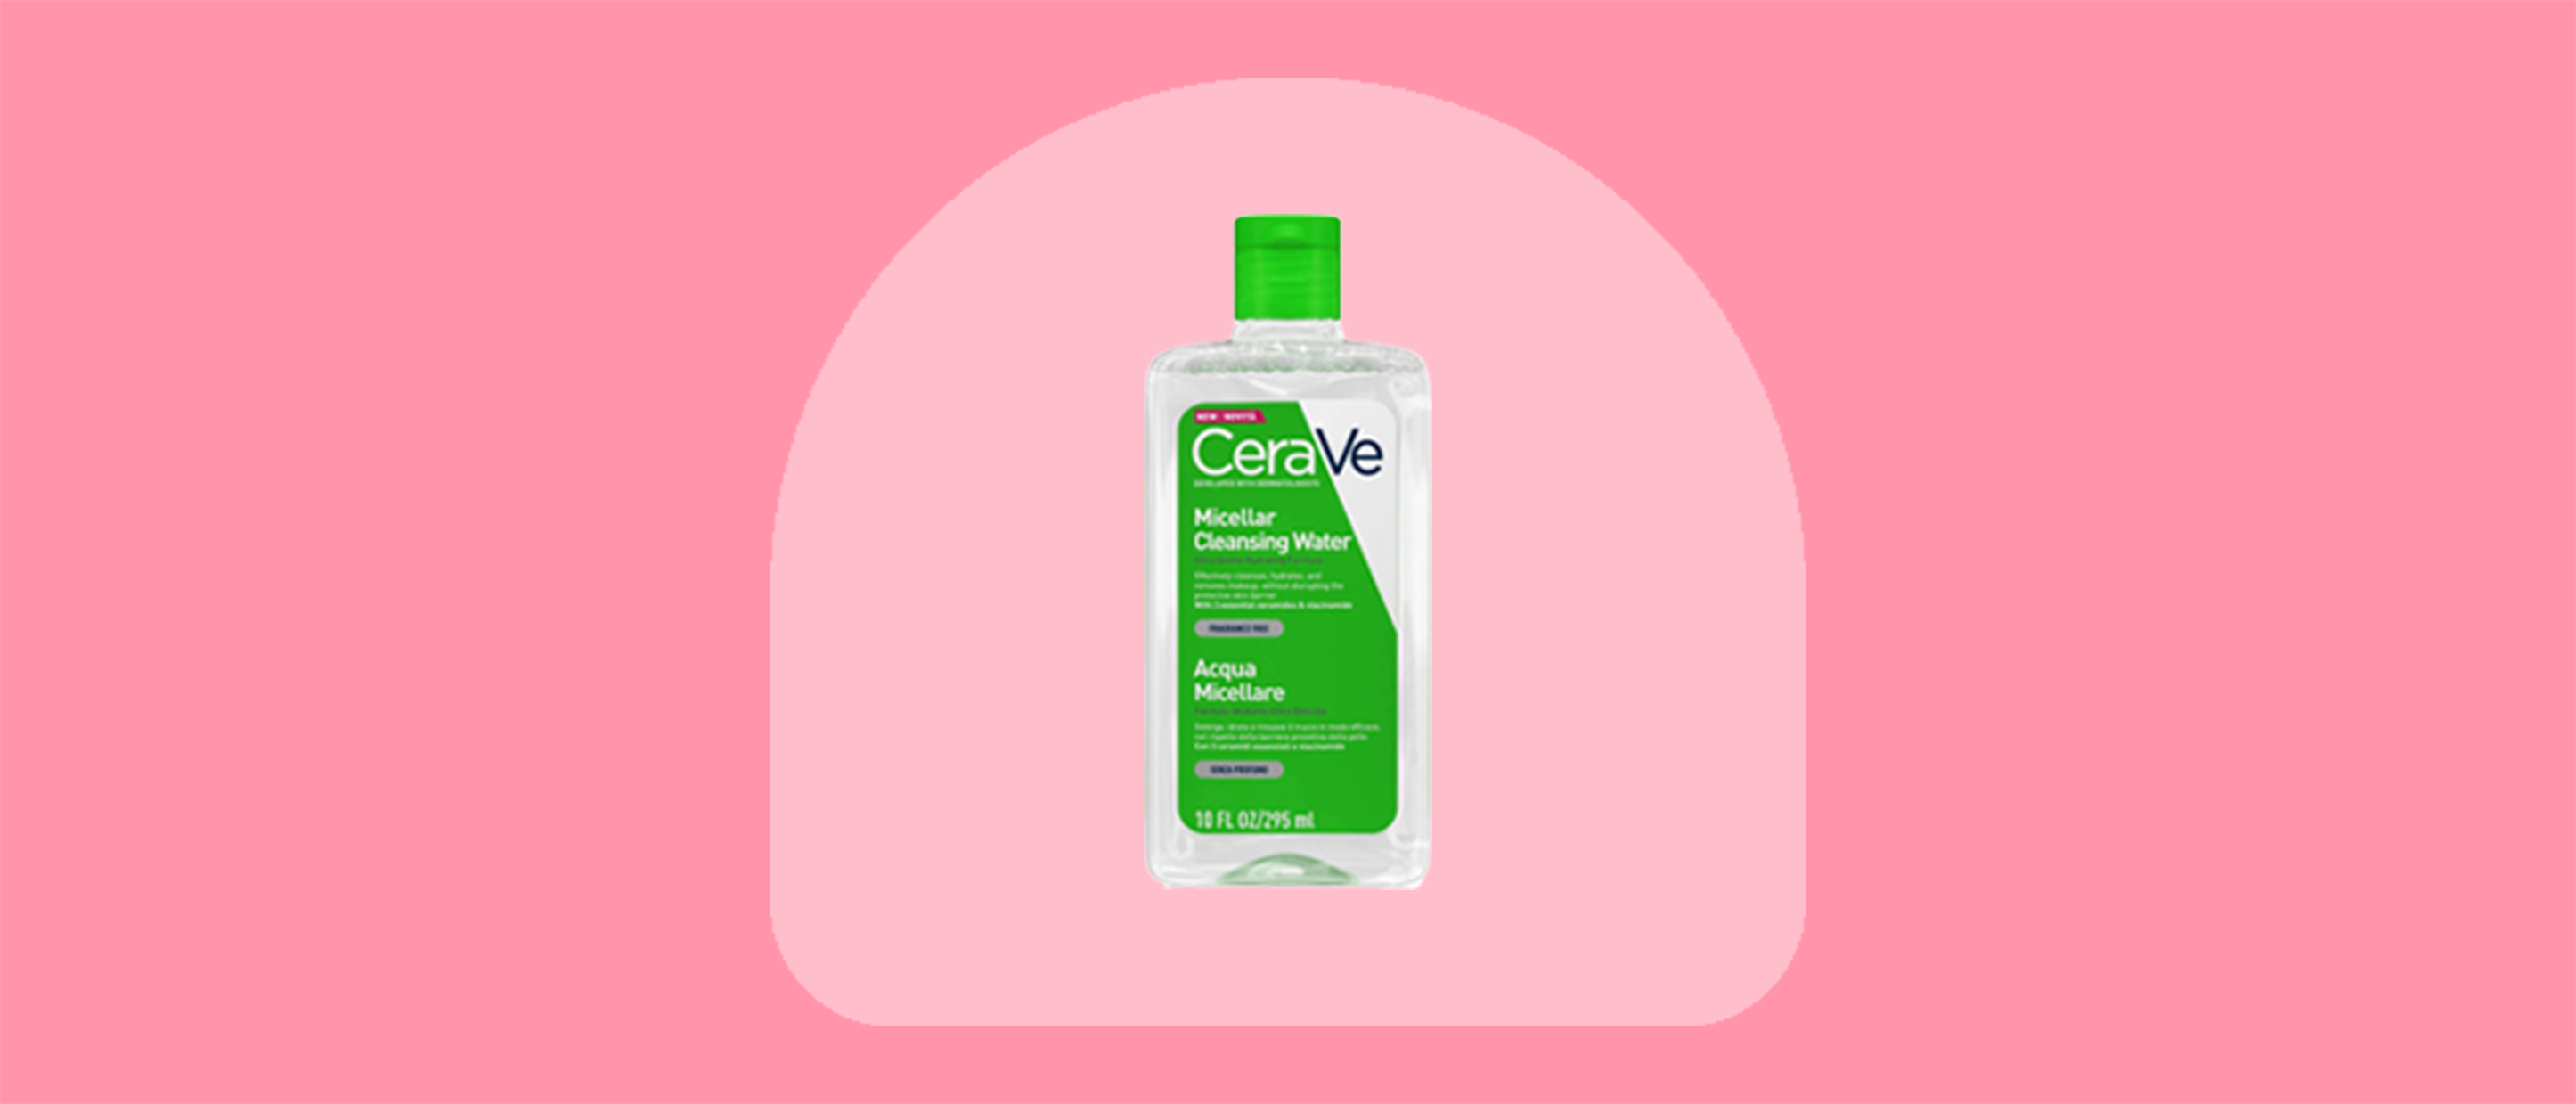 launches £10 Micellar Water Best Buys